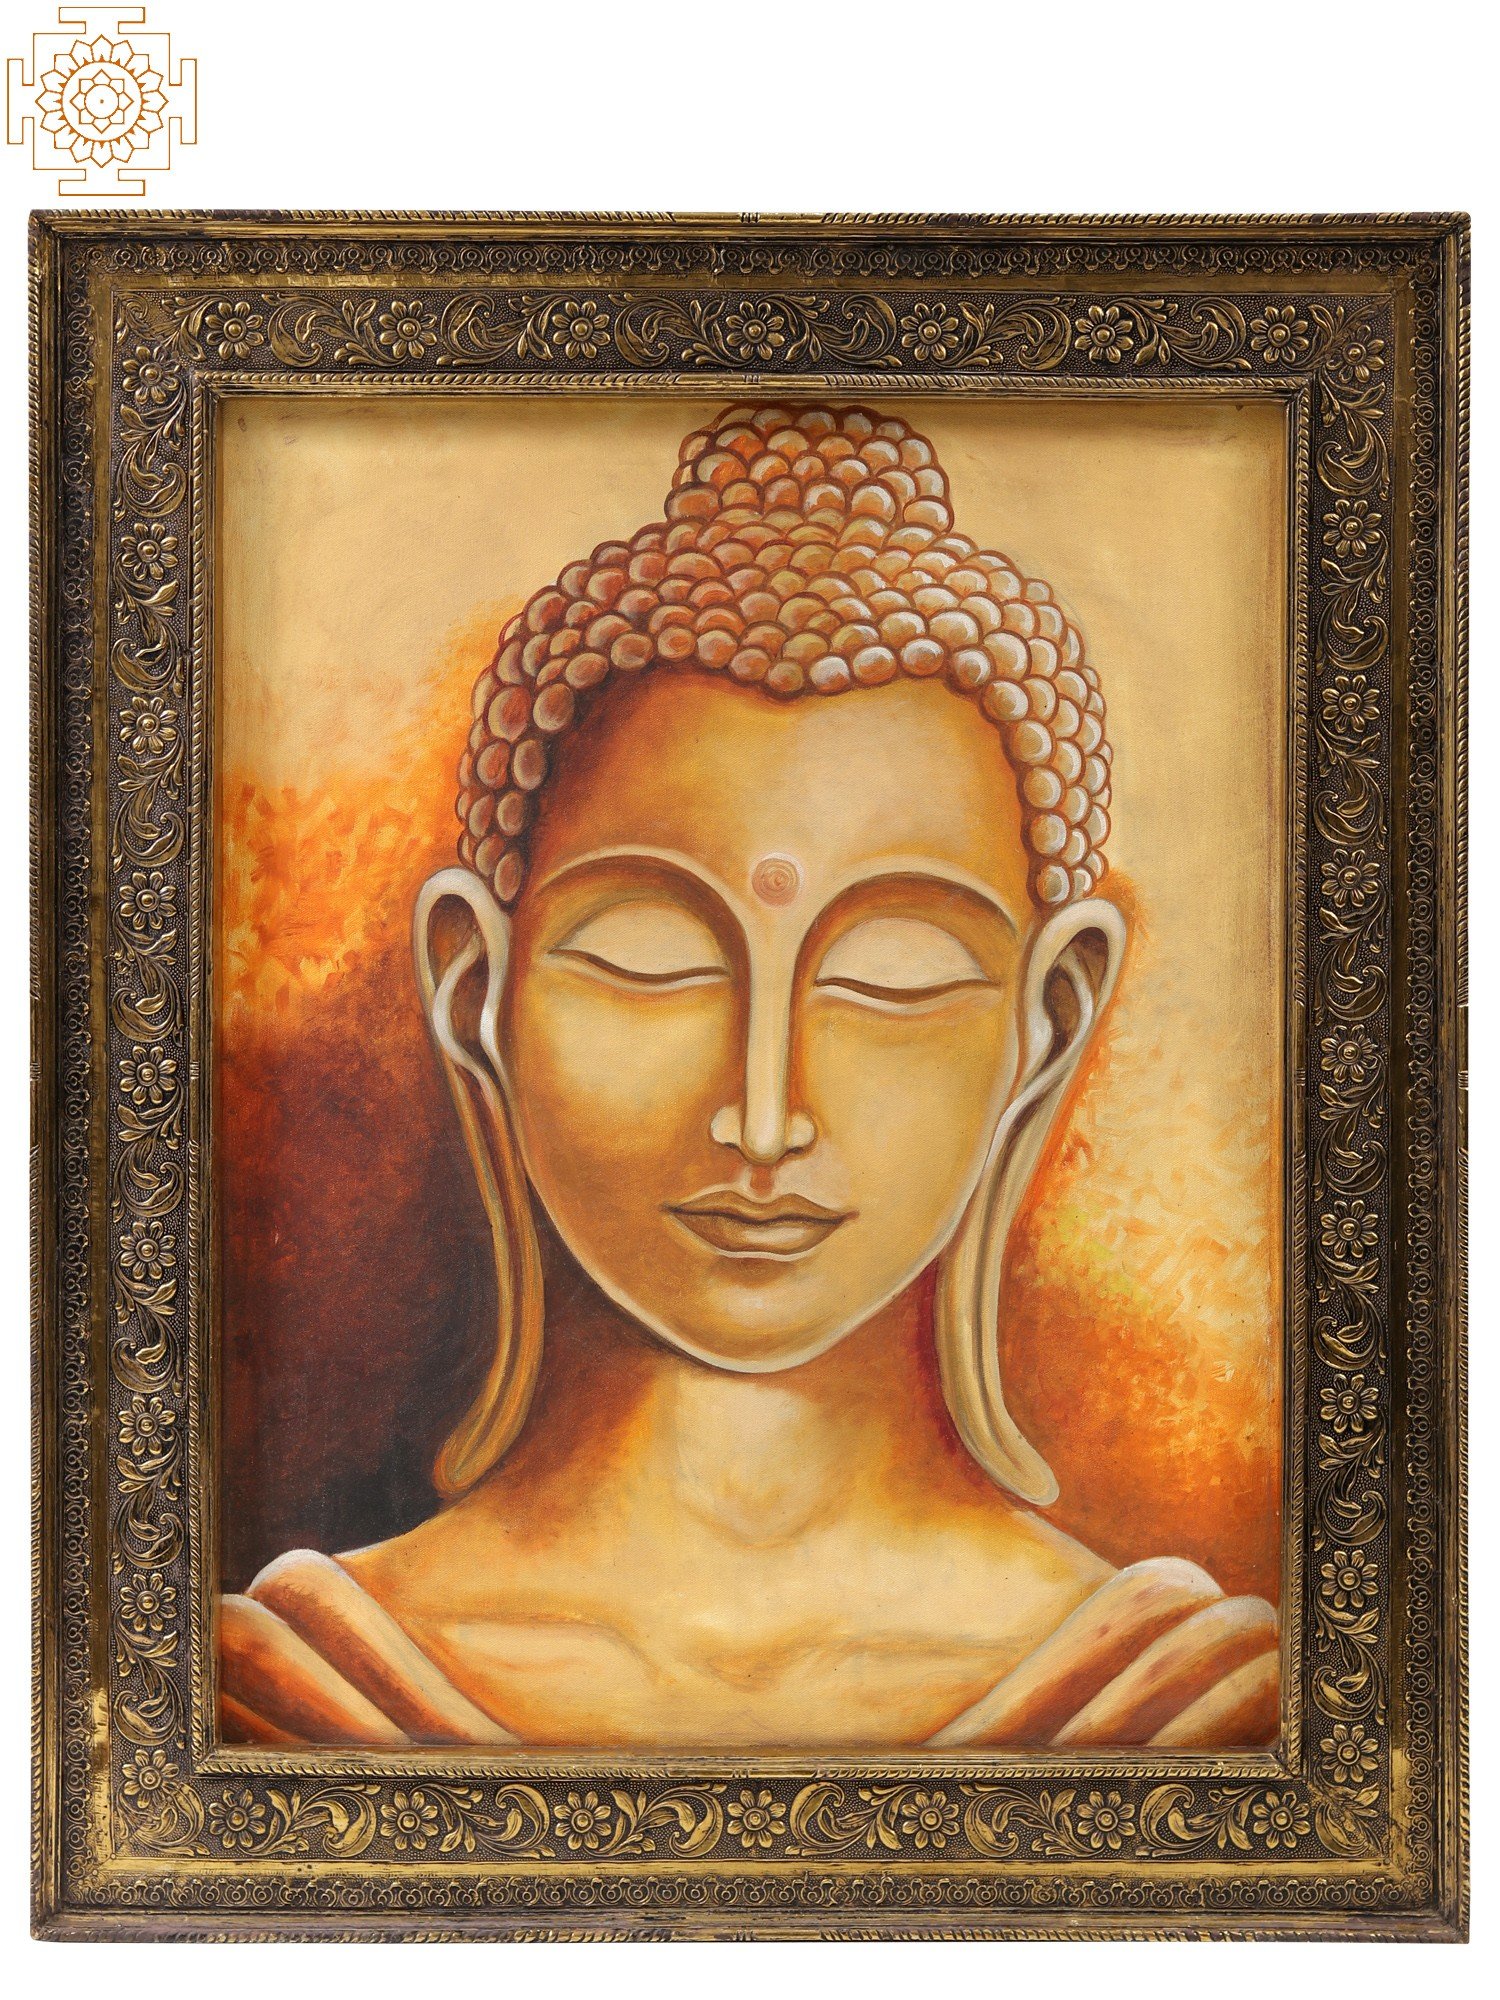 Lord Buddha  Poster for Sale by Shailendra Singh  Redbubble